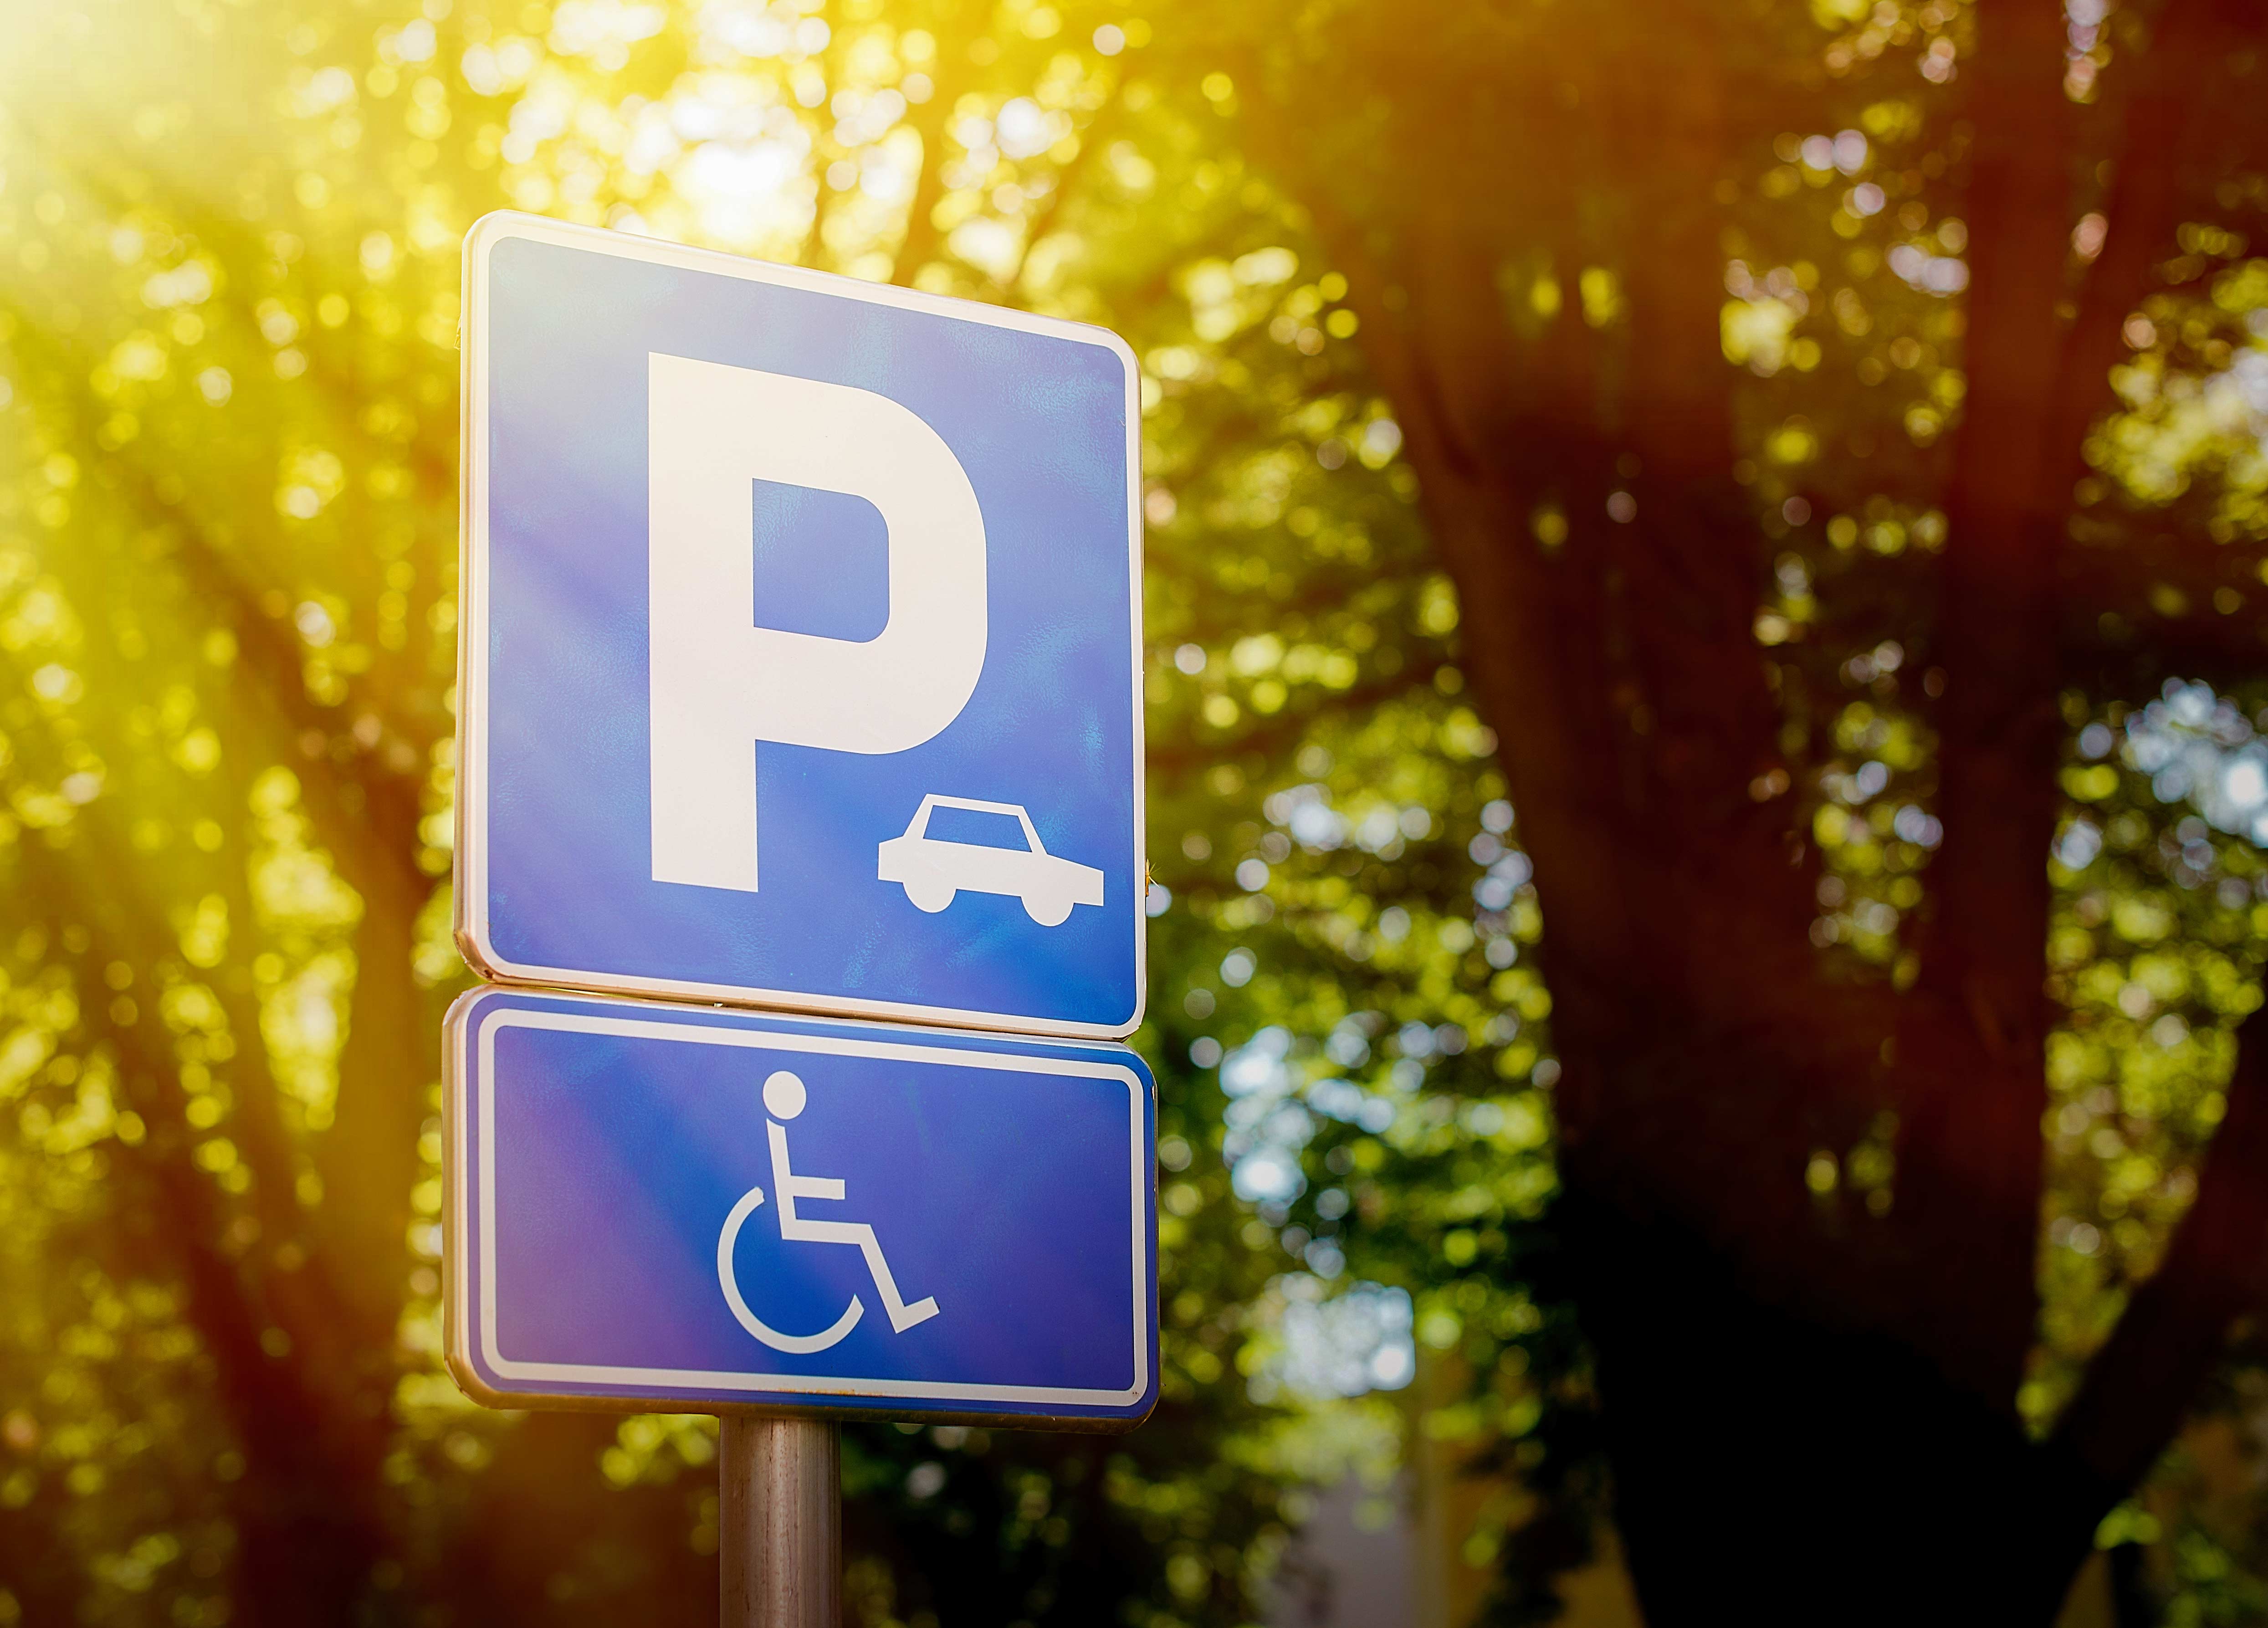 Disability parking sign